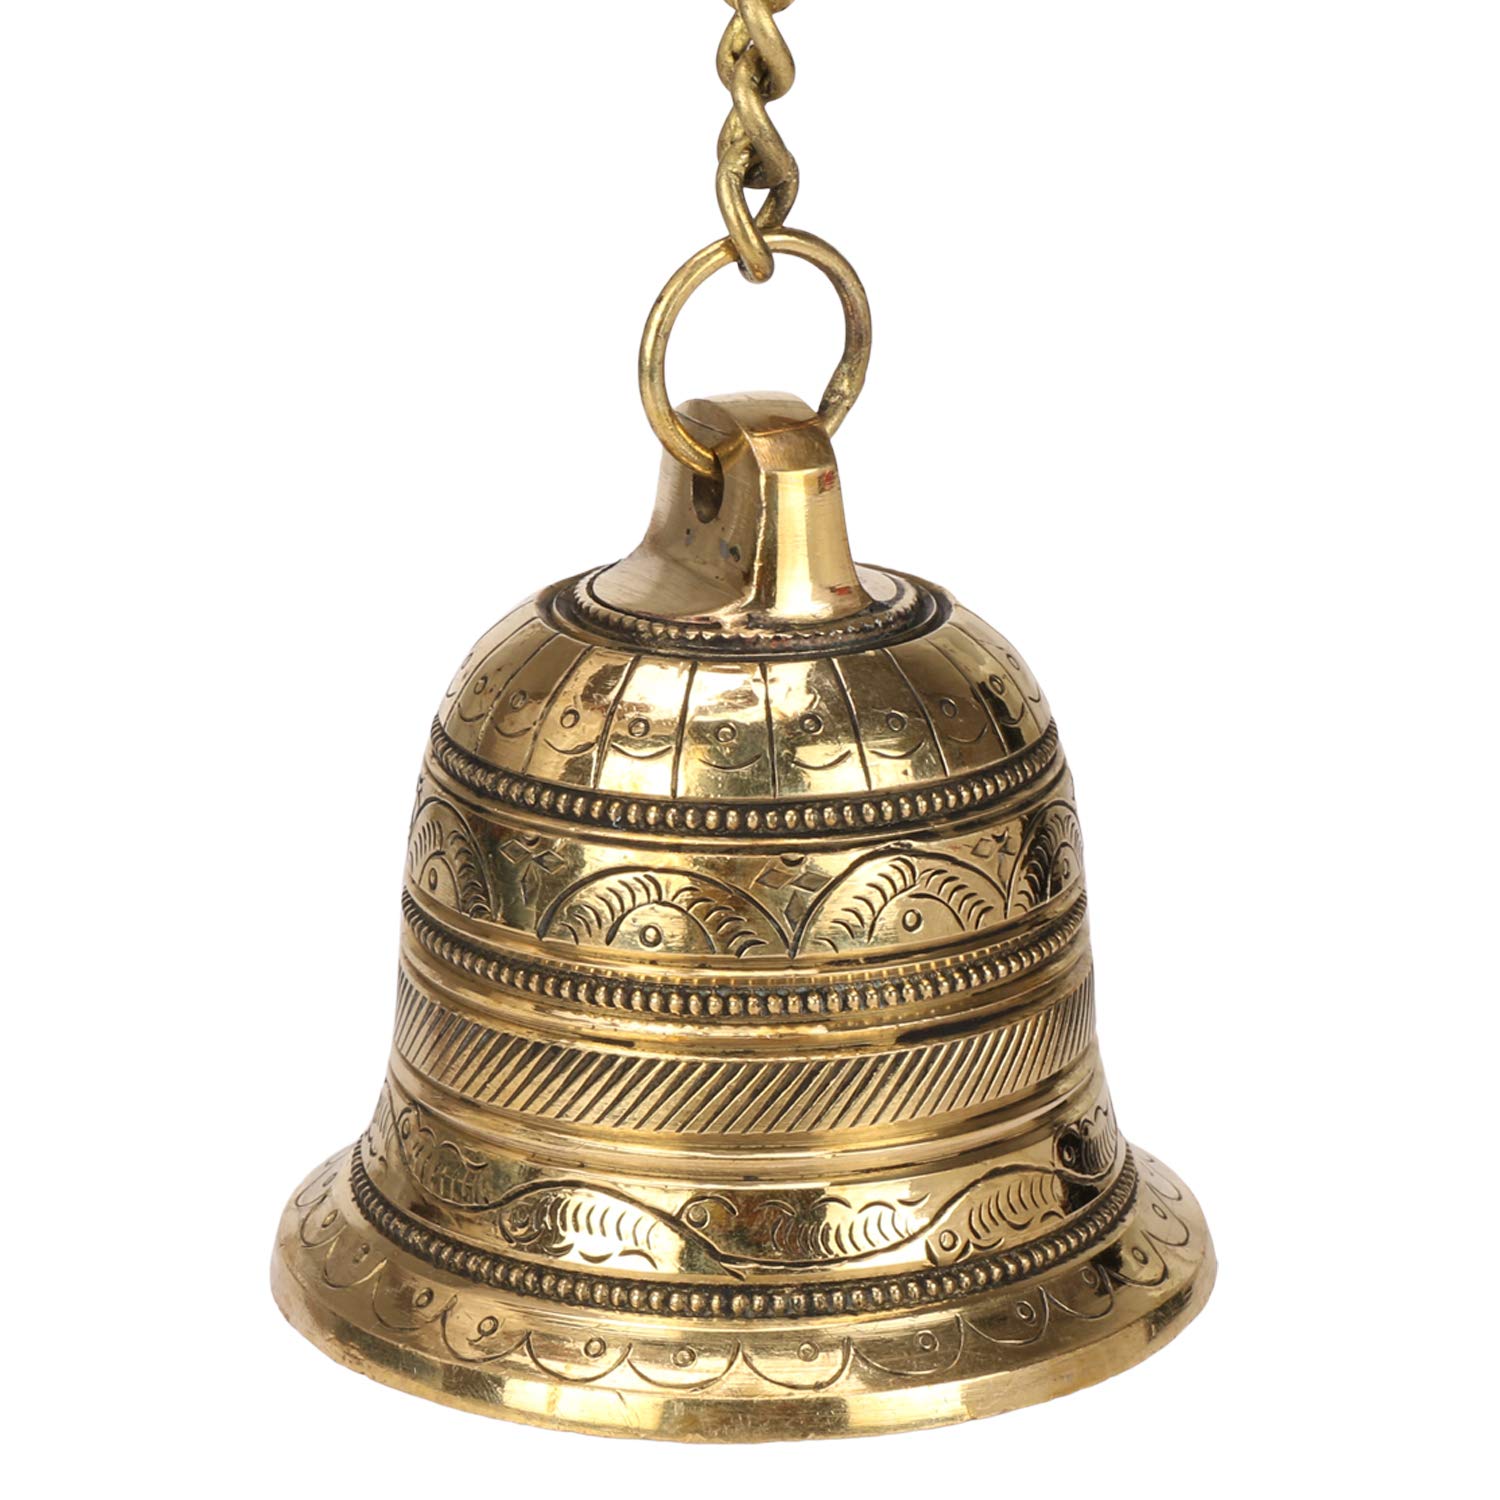 3 Wall Hanging Bell in Brass